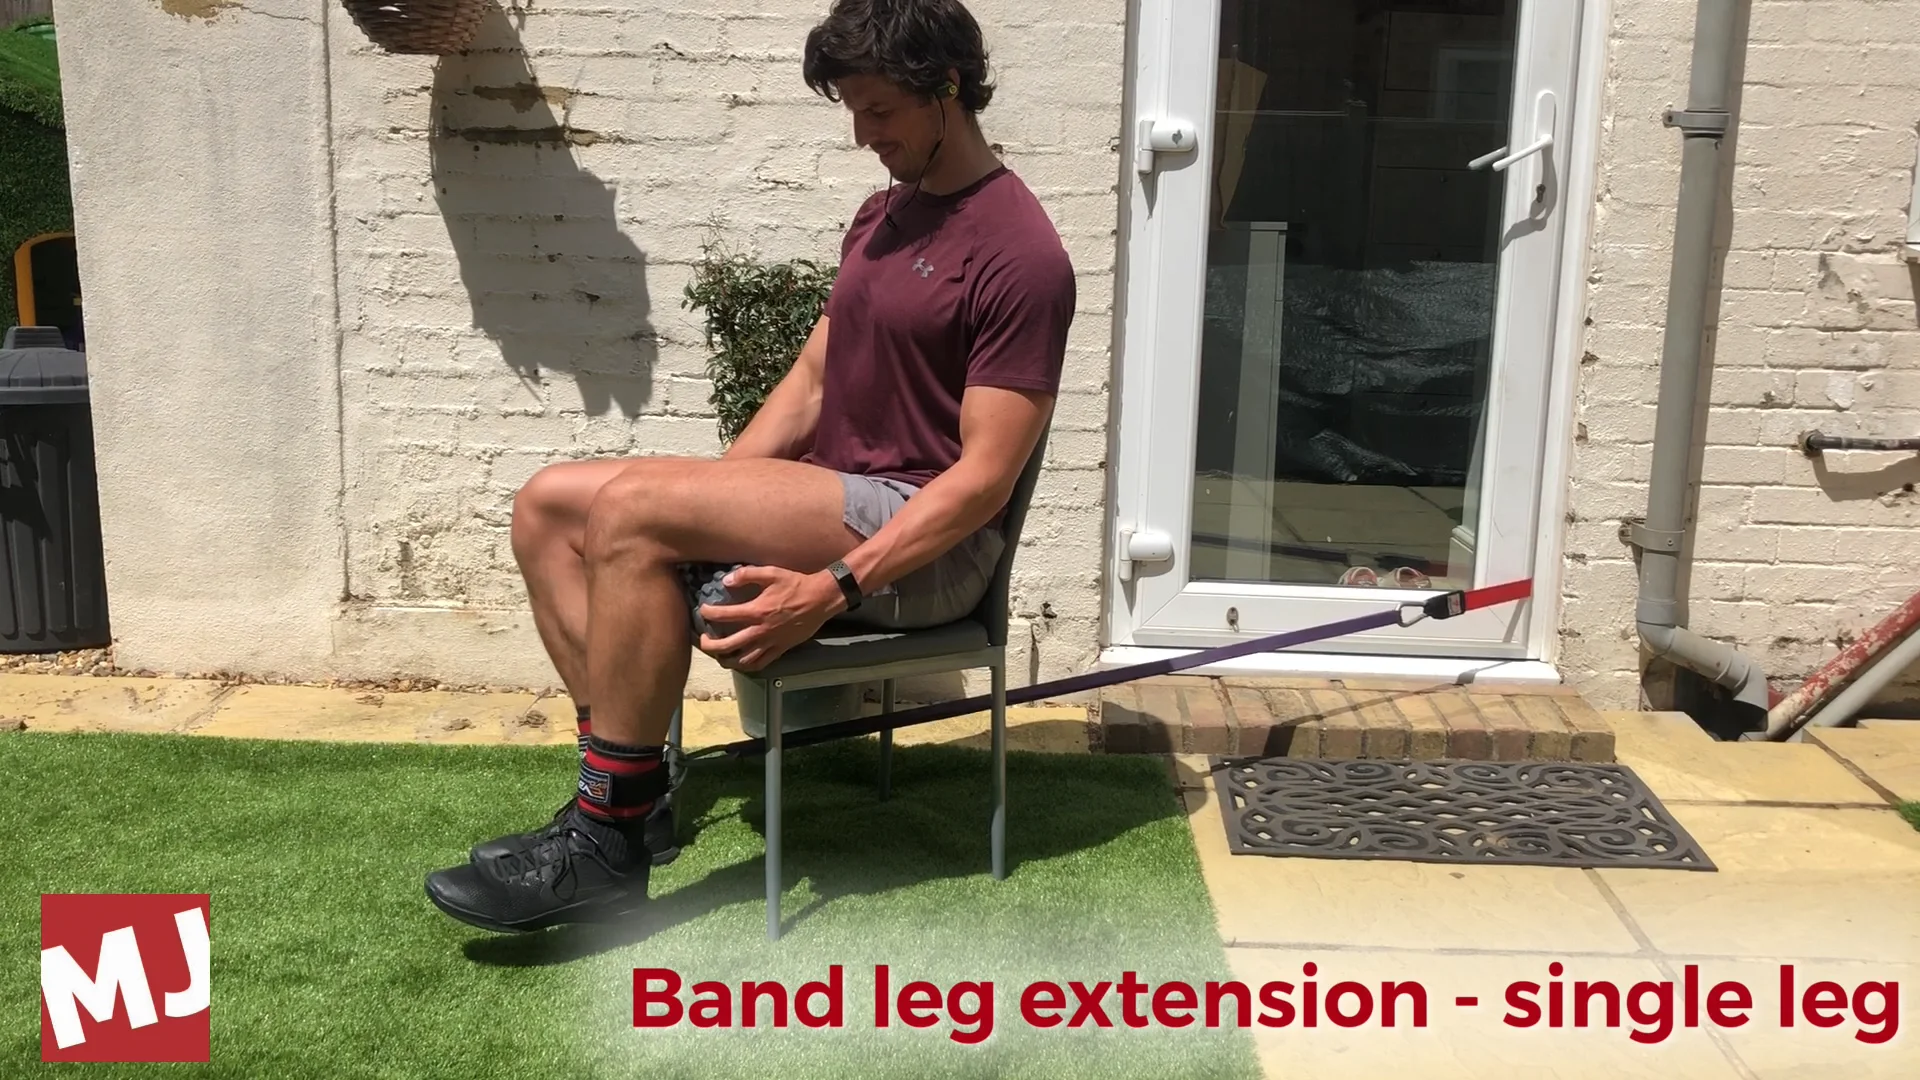 Leg extension with resistance band on Vimeo